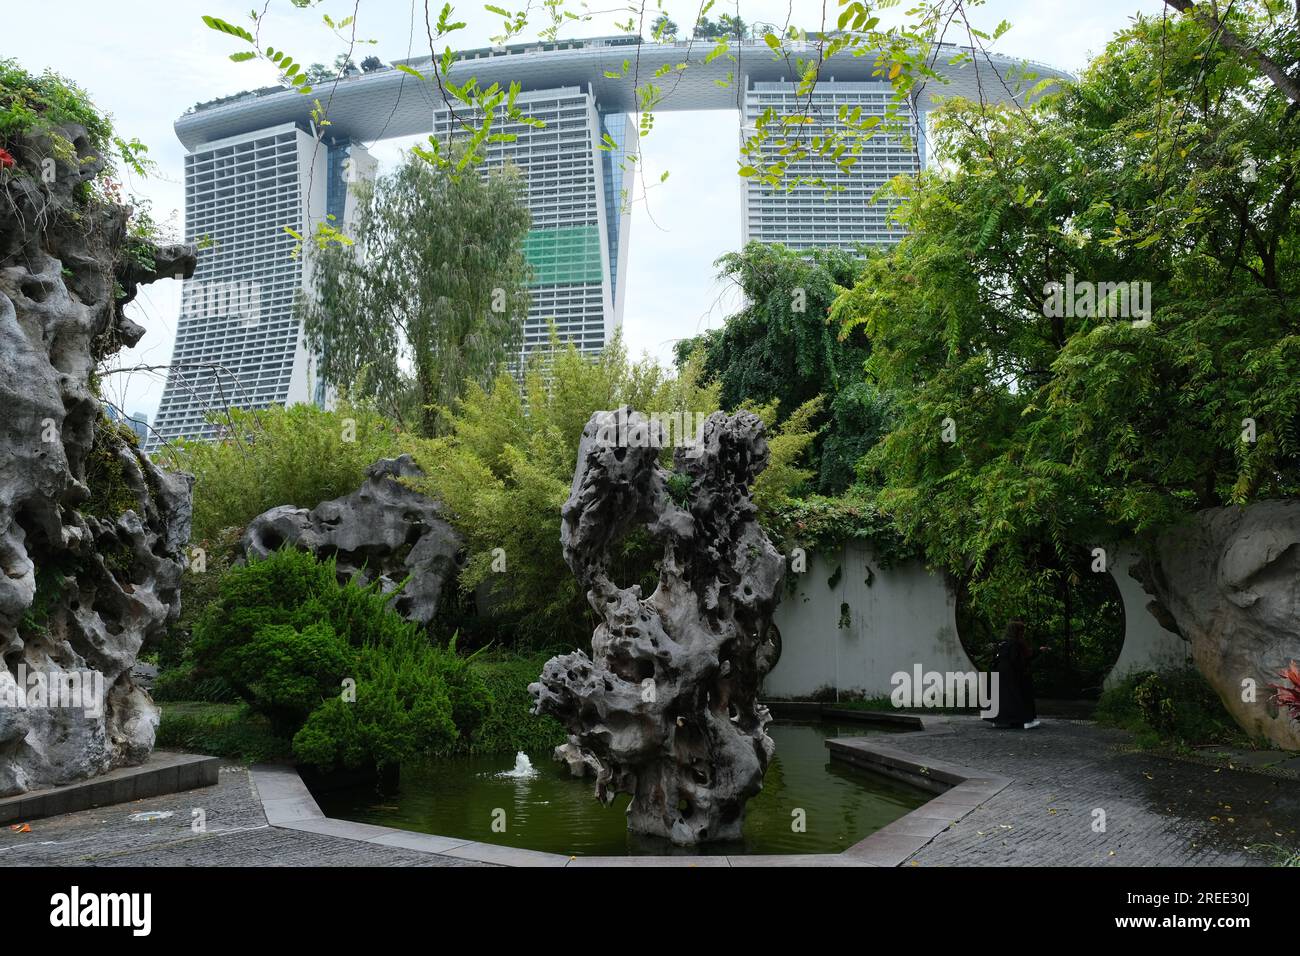 Singapore's Marina Bay Sands casino seen from traditional Chinese garden in the Gardens by the Bay Stock Photo